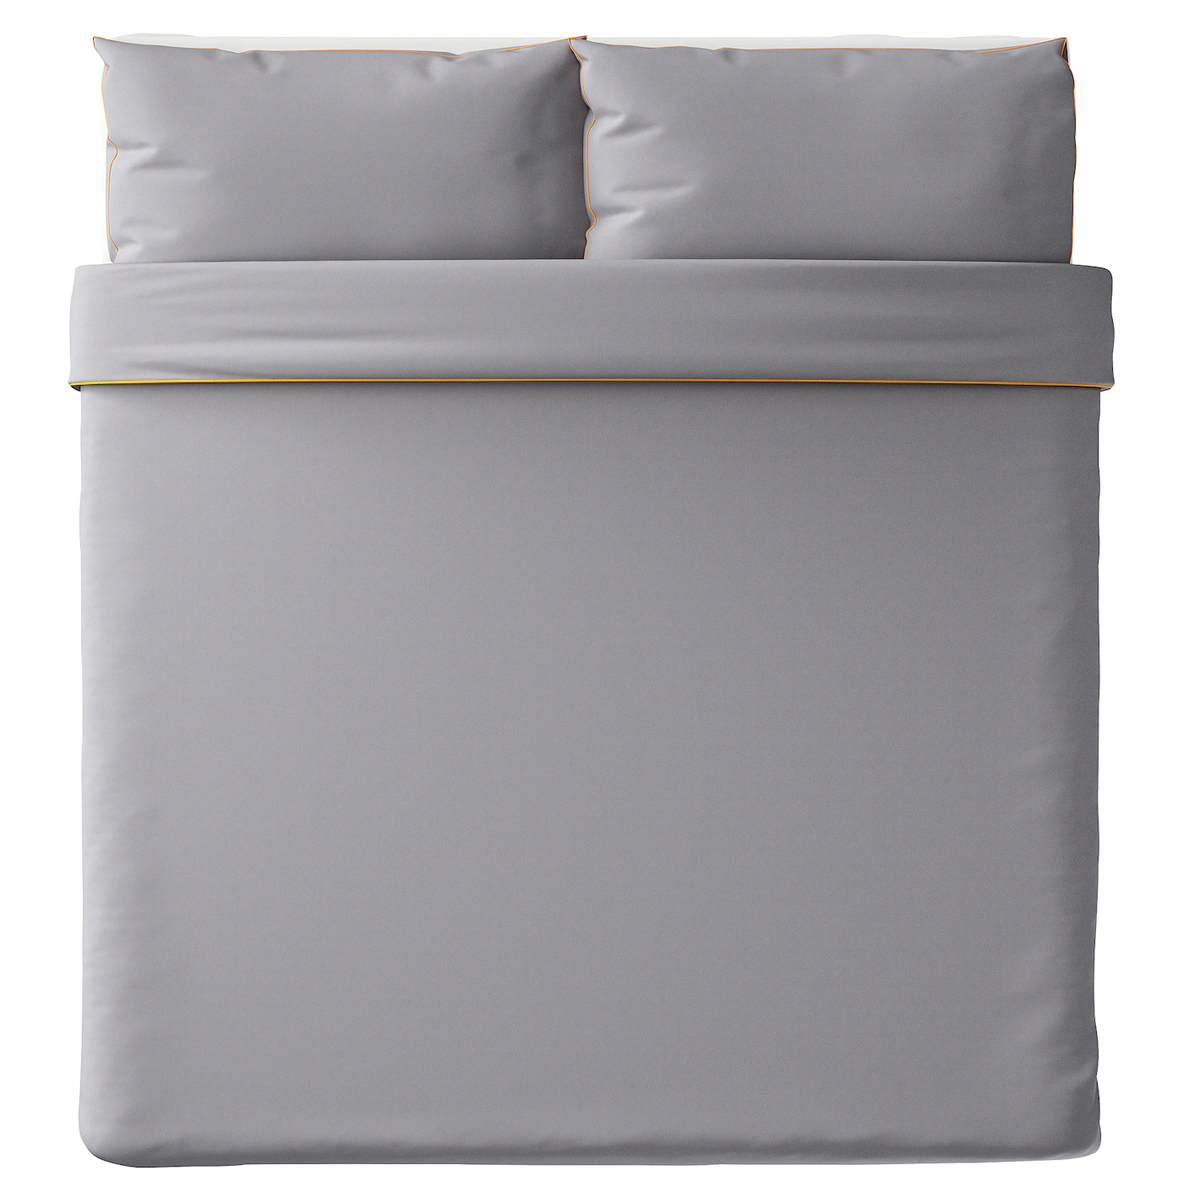 Quilt cover and pillowcase, Grey Yellow 150x200/50x80 cm - KUNGSBLOMMA